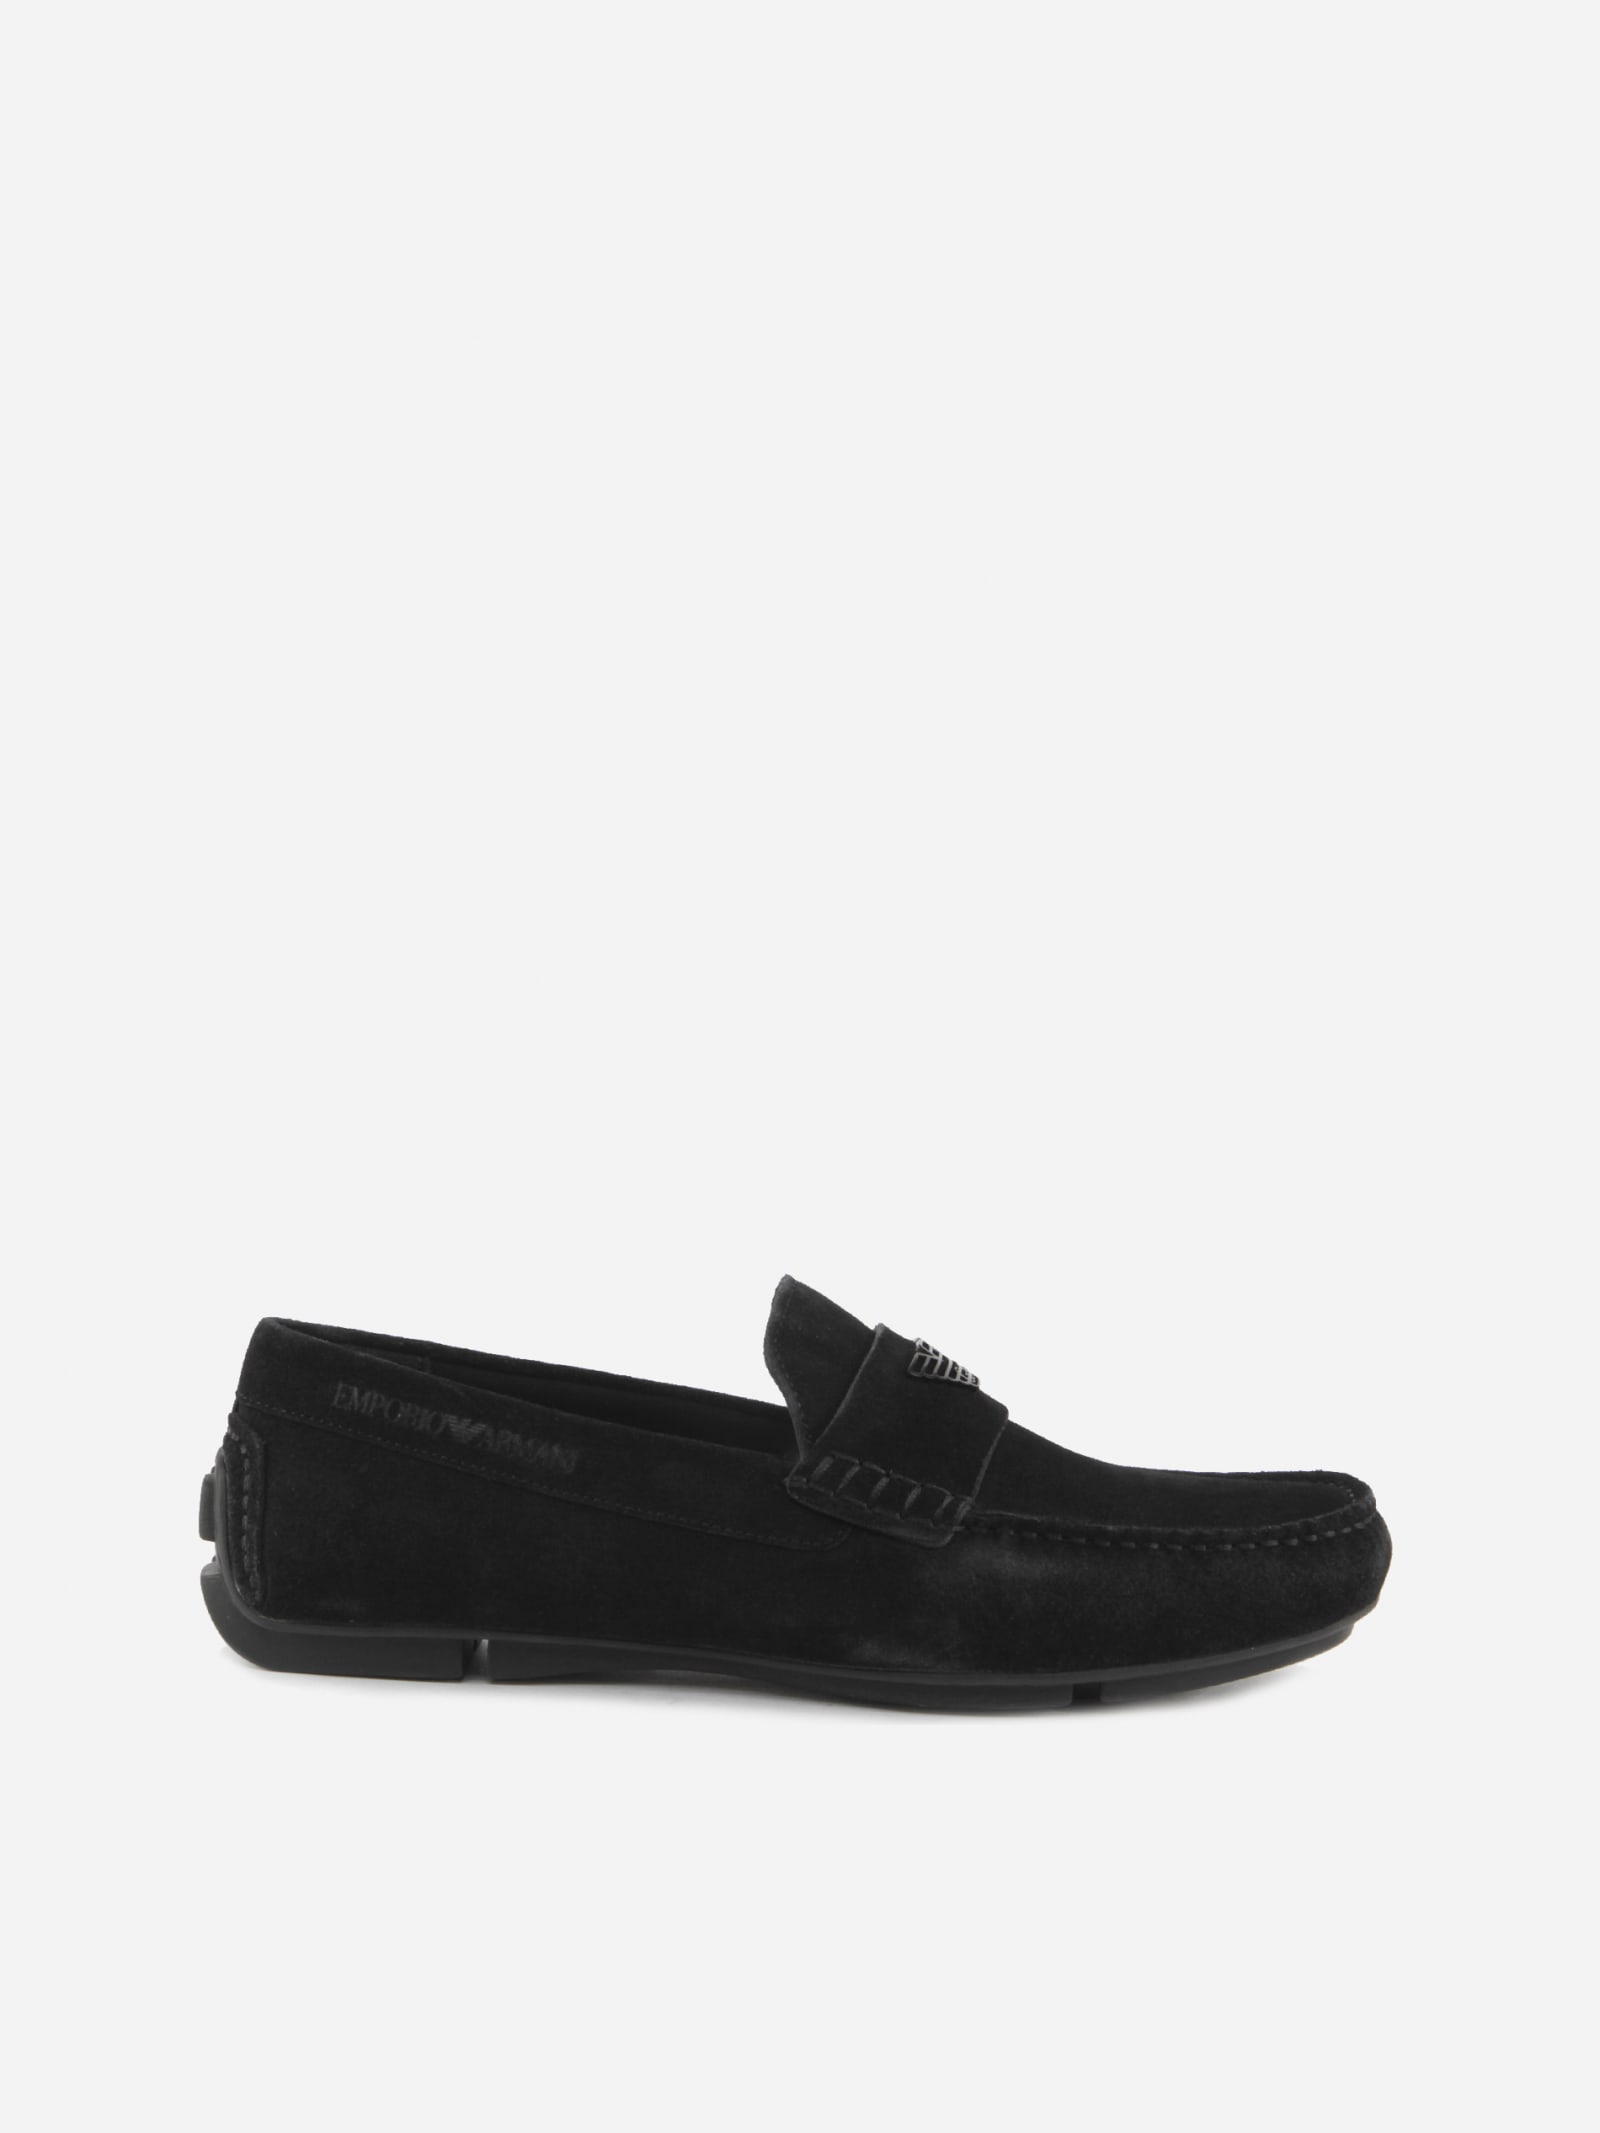 EMPORIO ARMANI DRIVER MOCCASINS MADE OF SUEDE,X4B124 XF18800002